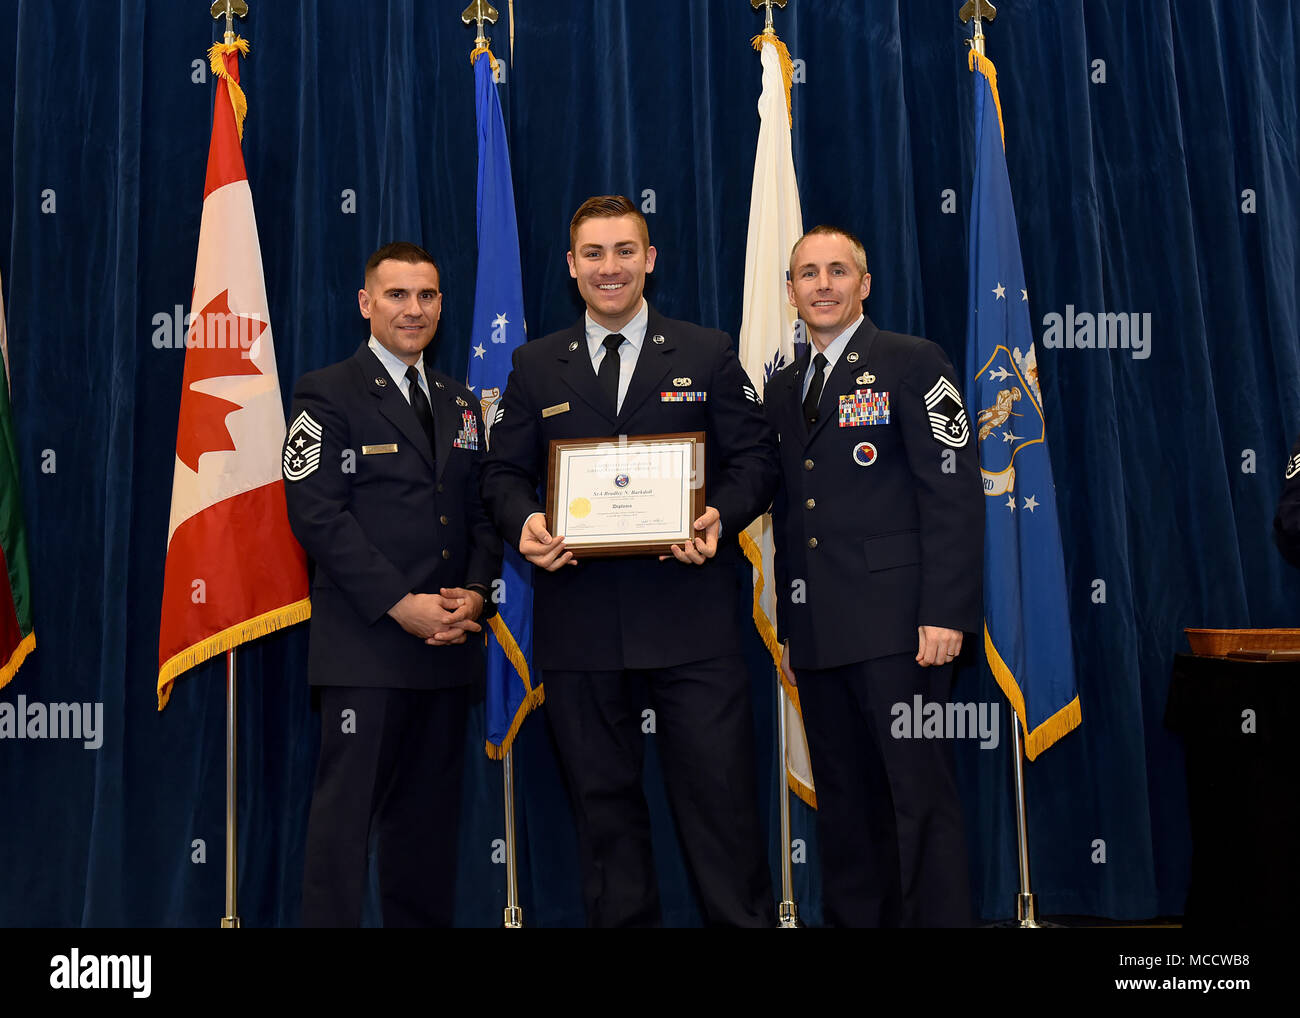 Senior Airman Bradley Barkdoll from Harrisburg Air National Guard Base, Pa., takes the Distinguished Graduate Award in Airman Leadership School BLC 18-3 at the Chief Master Sgt. Paul H. Lankford Enlisted Professional Military Education Center on McGhee Tyson Air National Guard Base in East Tennessee, Feb. 8, 2018, during the graduation ceremony. (U.S. Air National Guard photo/Master Sgt. Mike R. Smith) Stock Photo